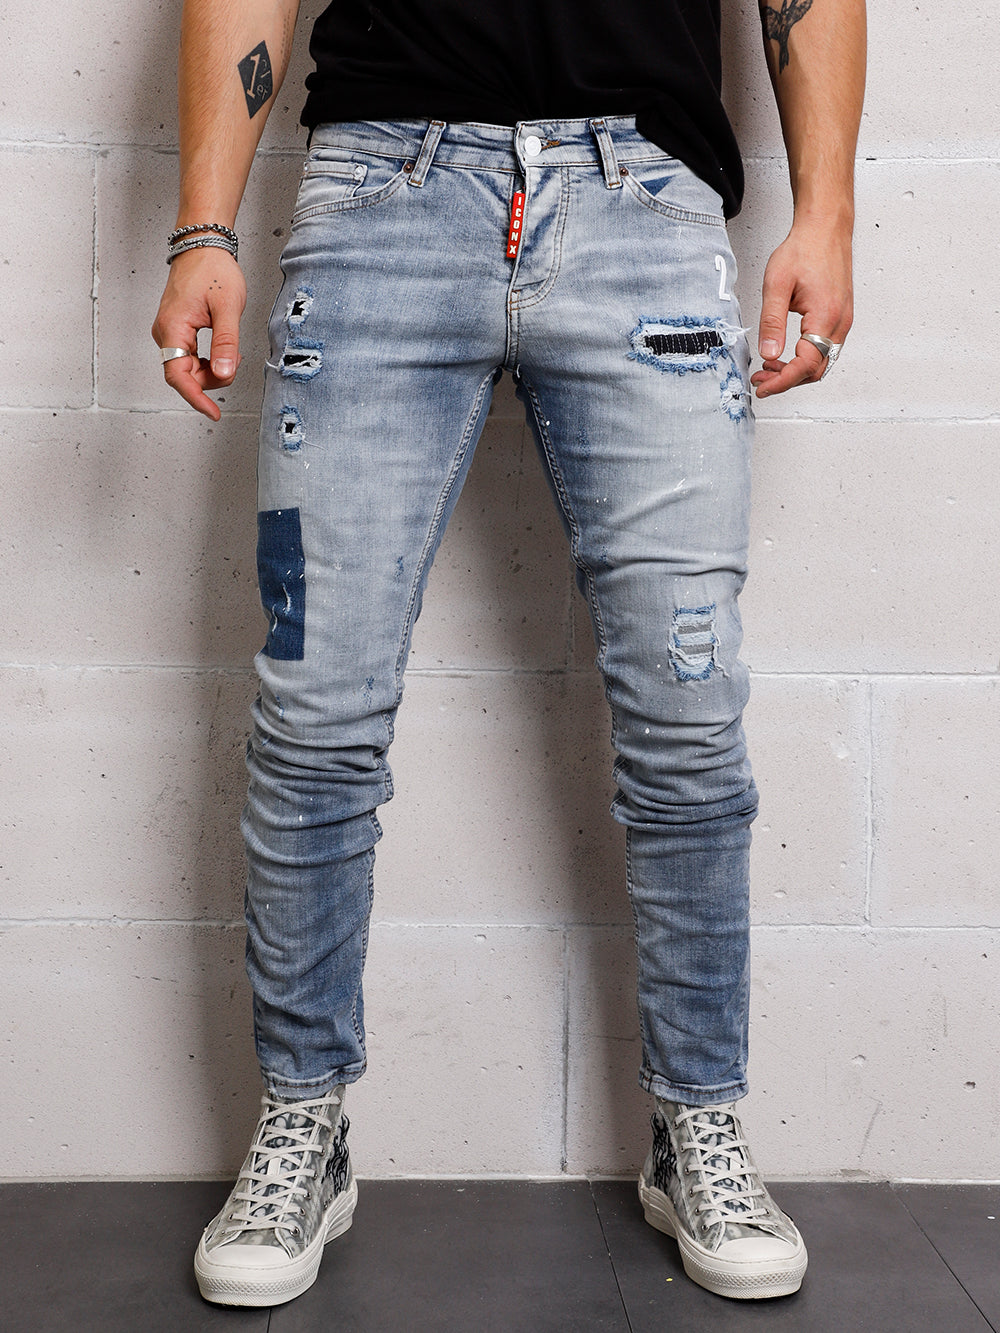 A man wearing SKY BLUE ICON DENIM distressed ripped jeans and a black t-shirt.